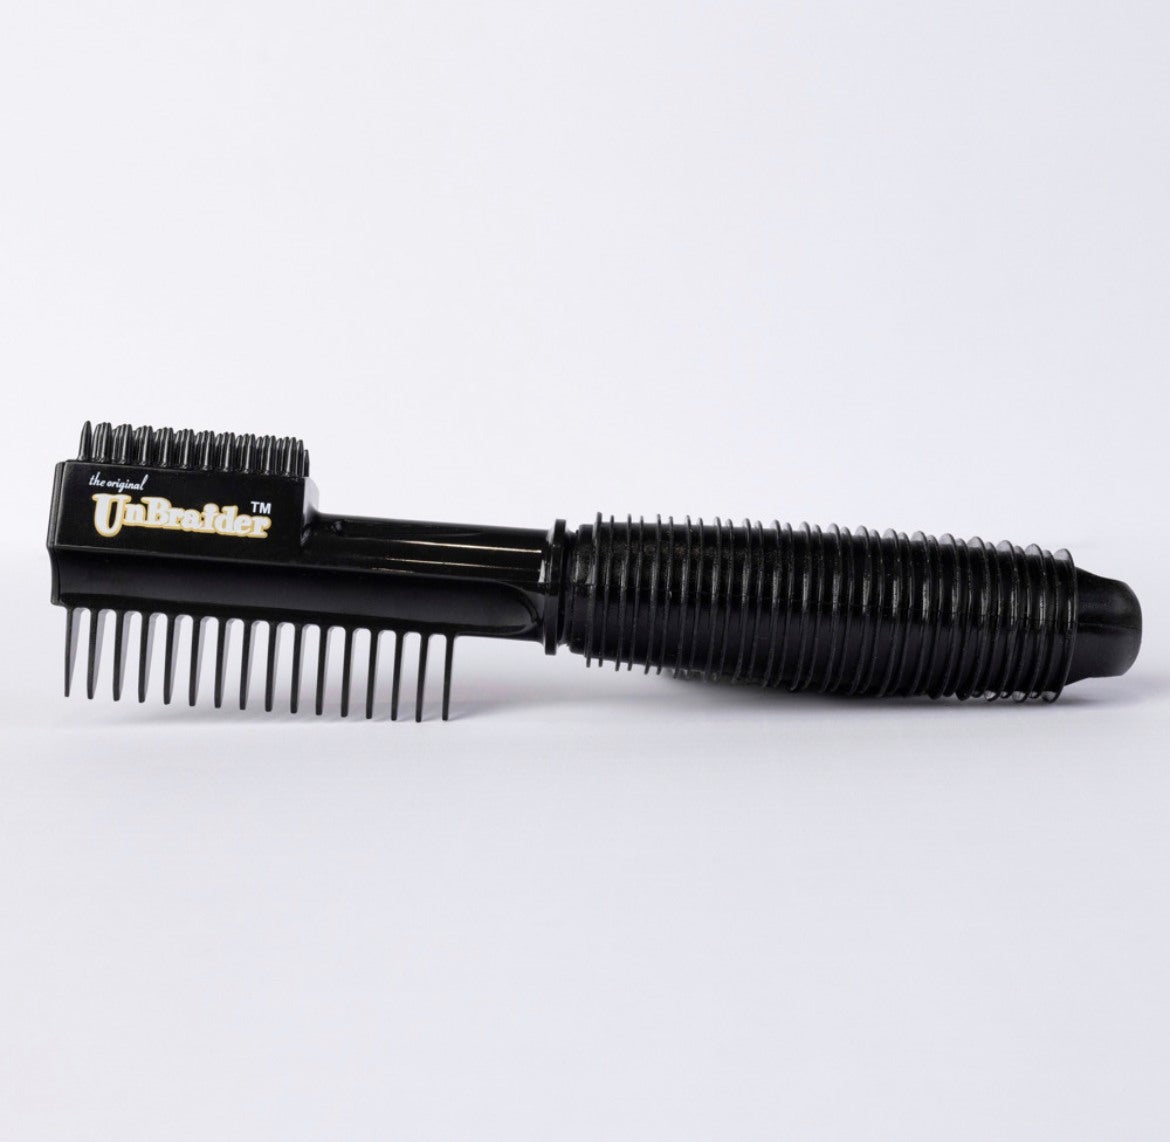 the comb, which has eight teeth on one side and on the other side is a smaller section of more concentrated bristles